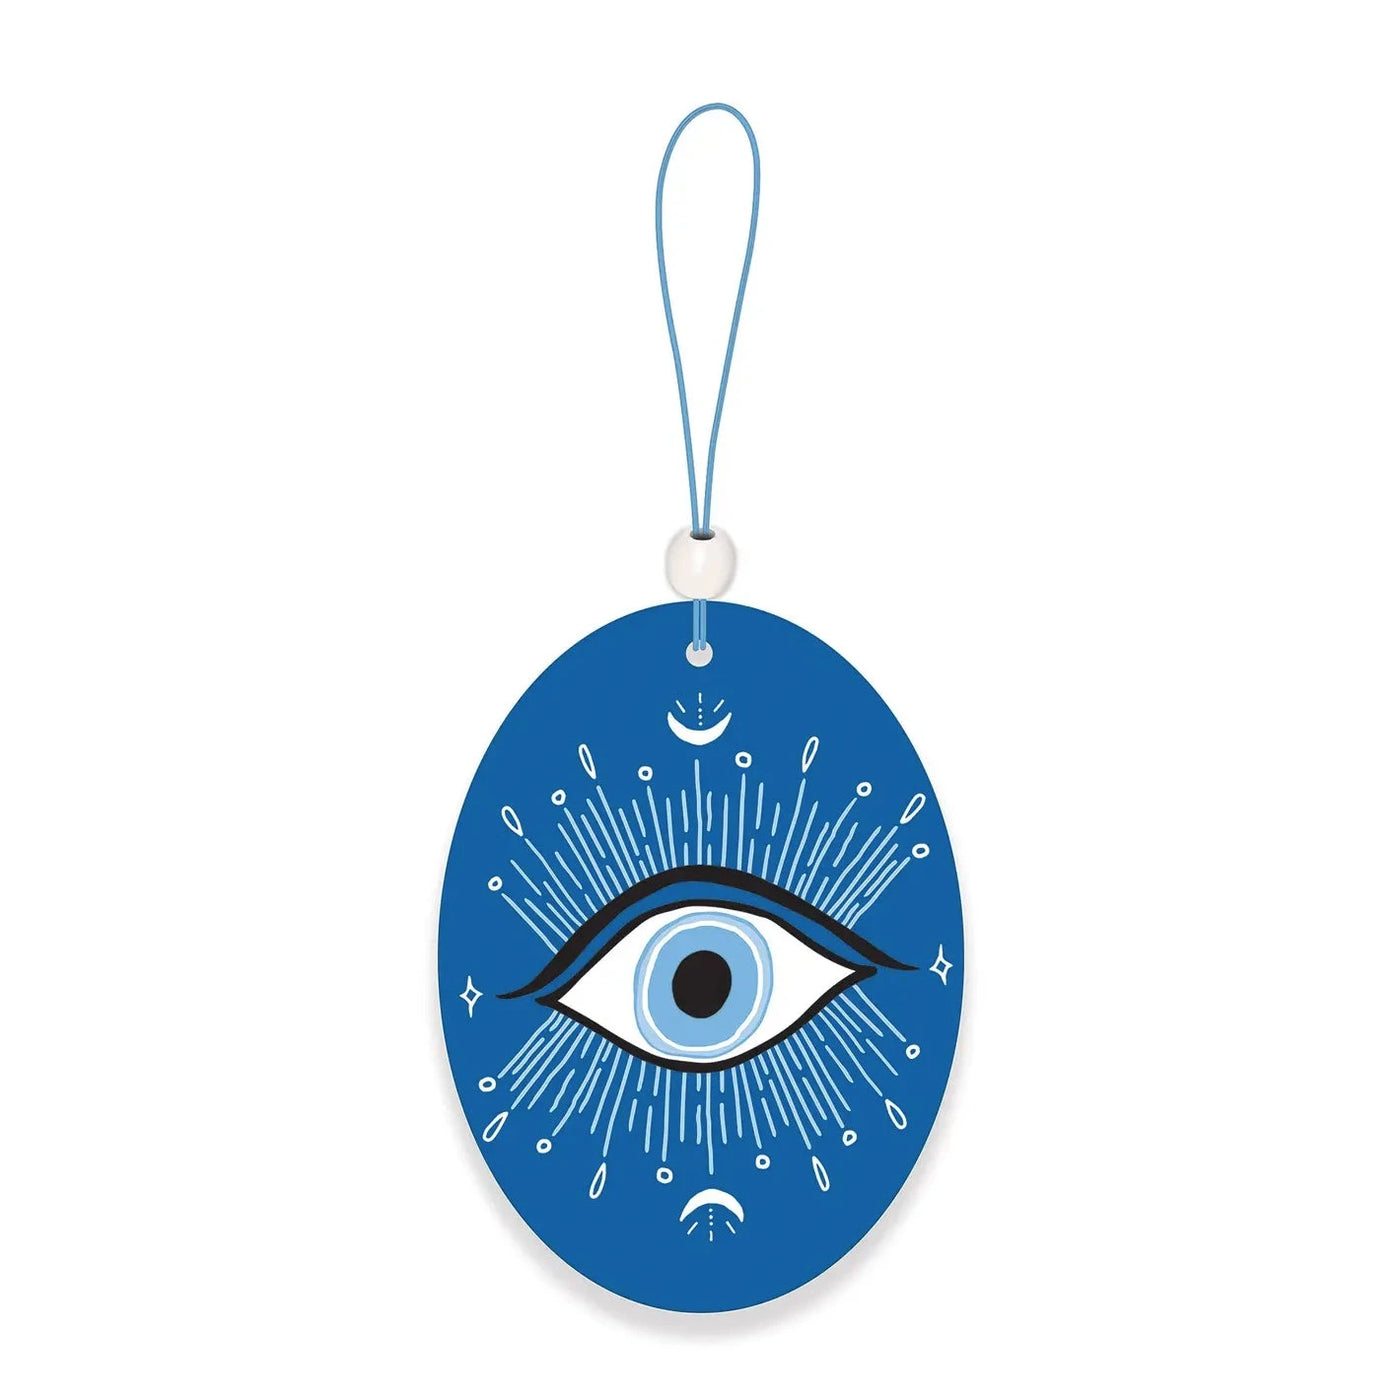 blue oval air freshener with a blue and white illustration of an eye